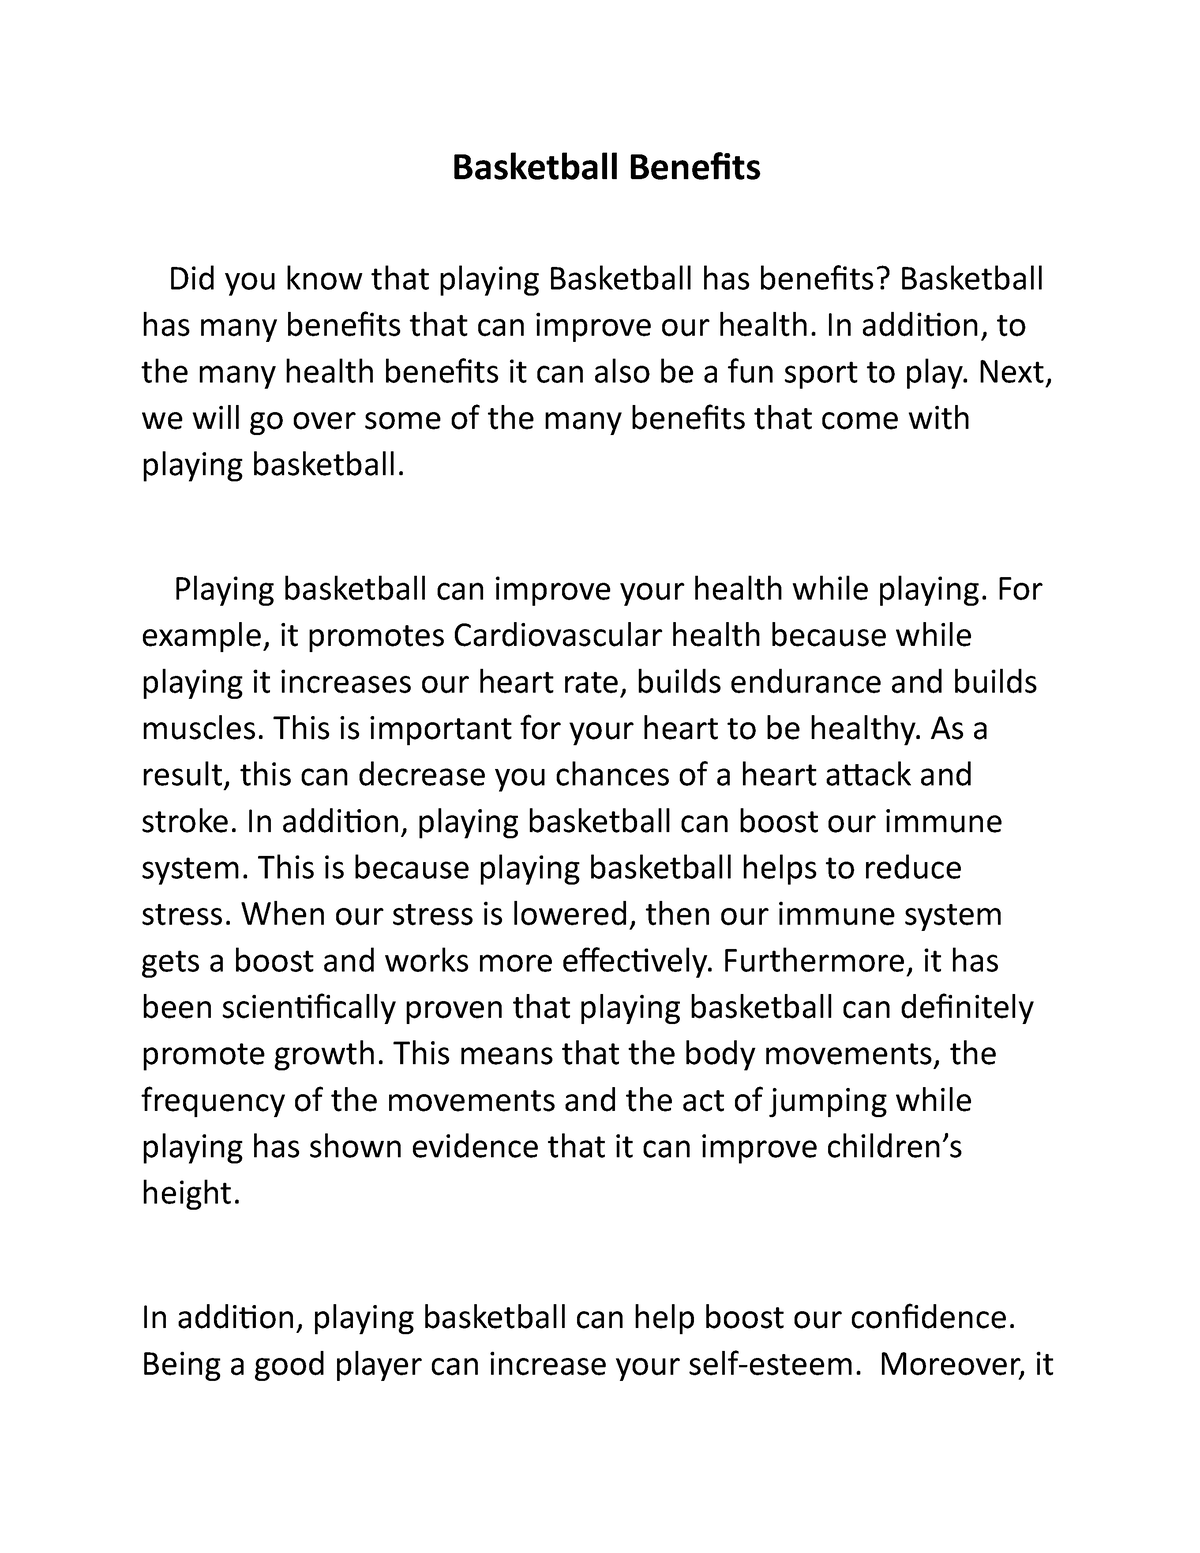 persuasive essay about basketball